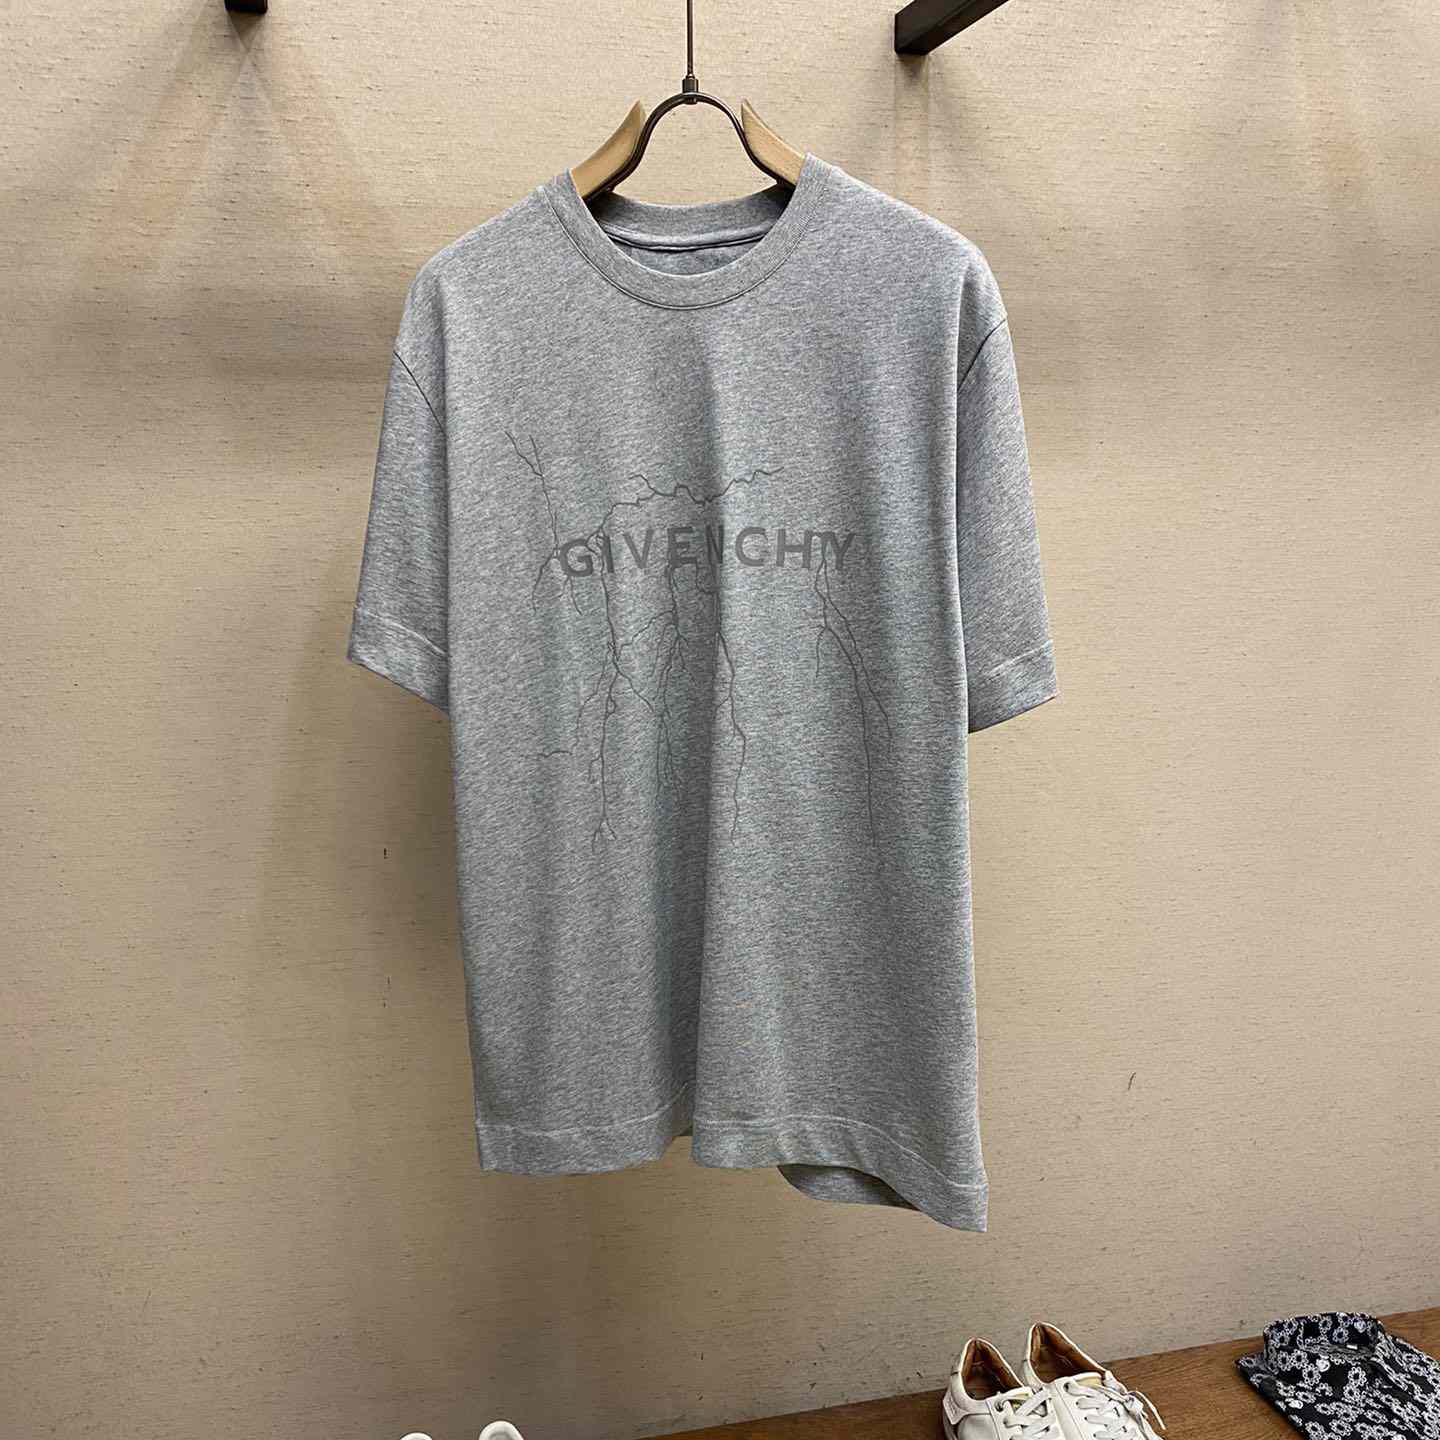 Givenchy Boxy Fit T-shirt In Cotton With Reflective Artwork - DesignerGu